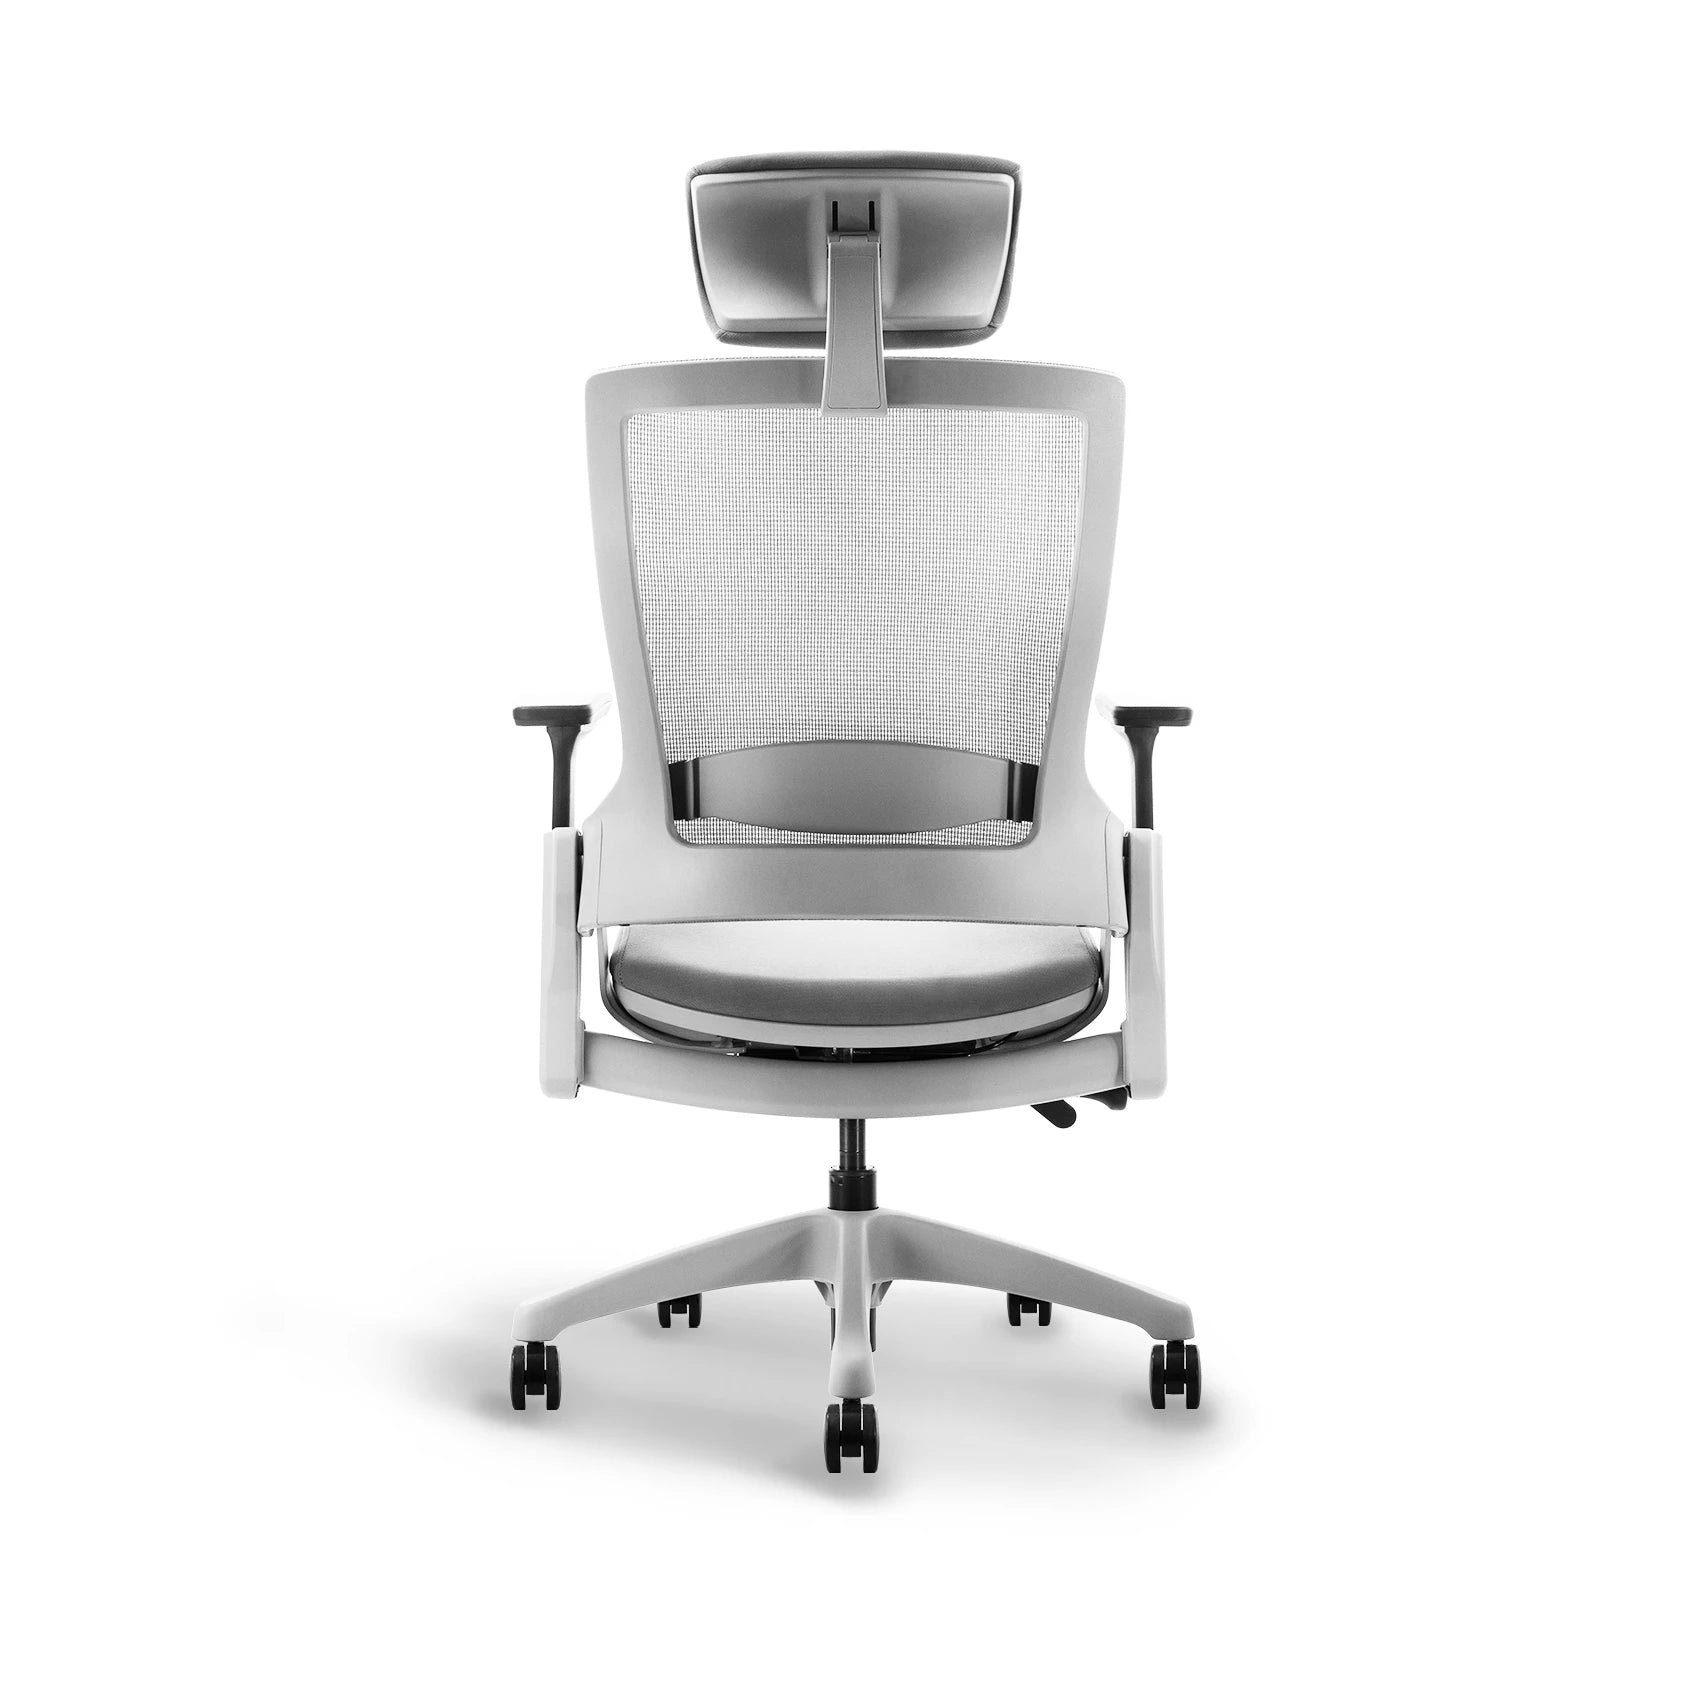 Flujo Angulo office chair with breathable mesh back and headrest in grey